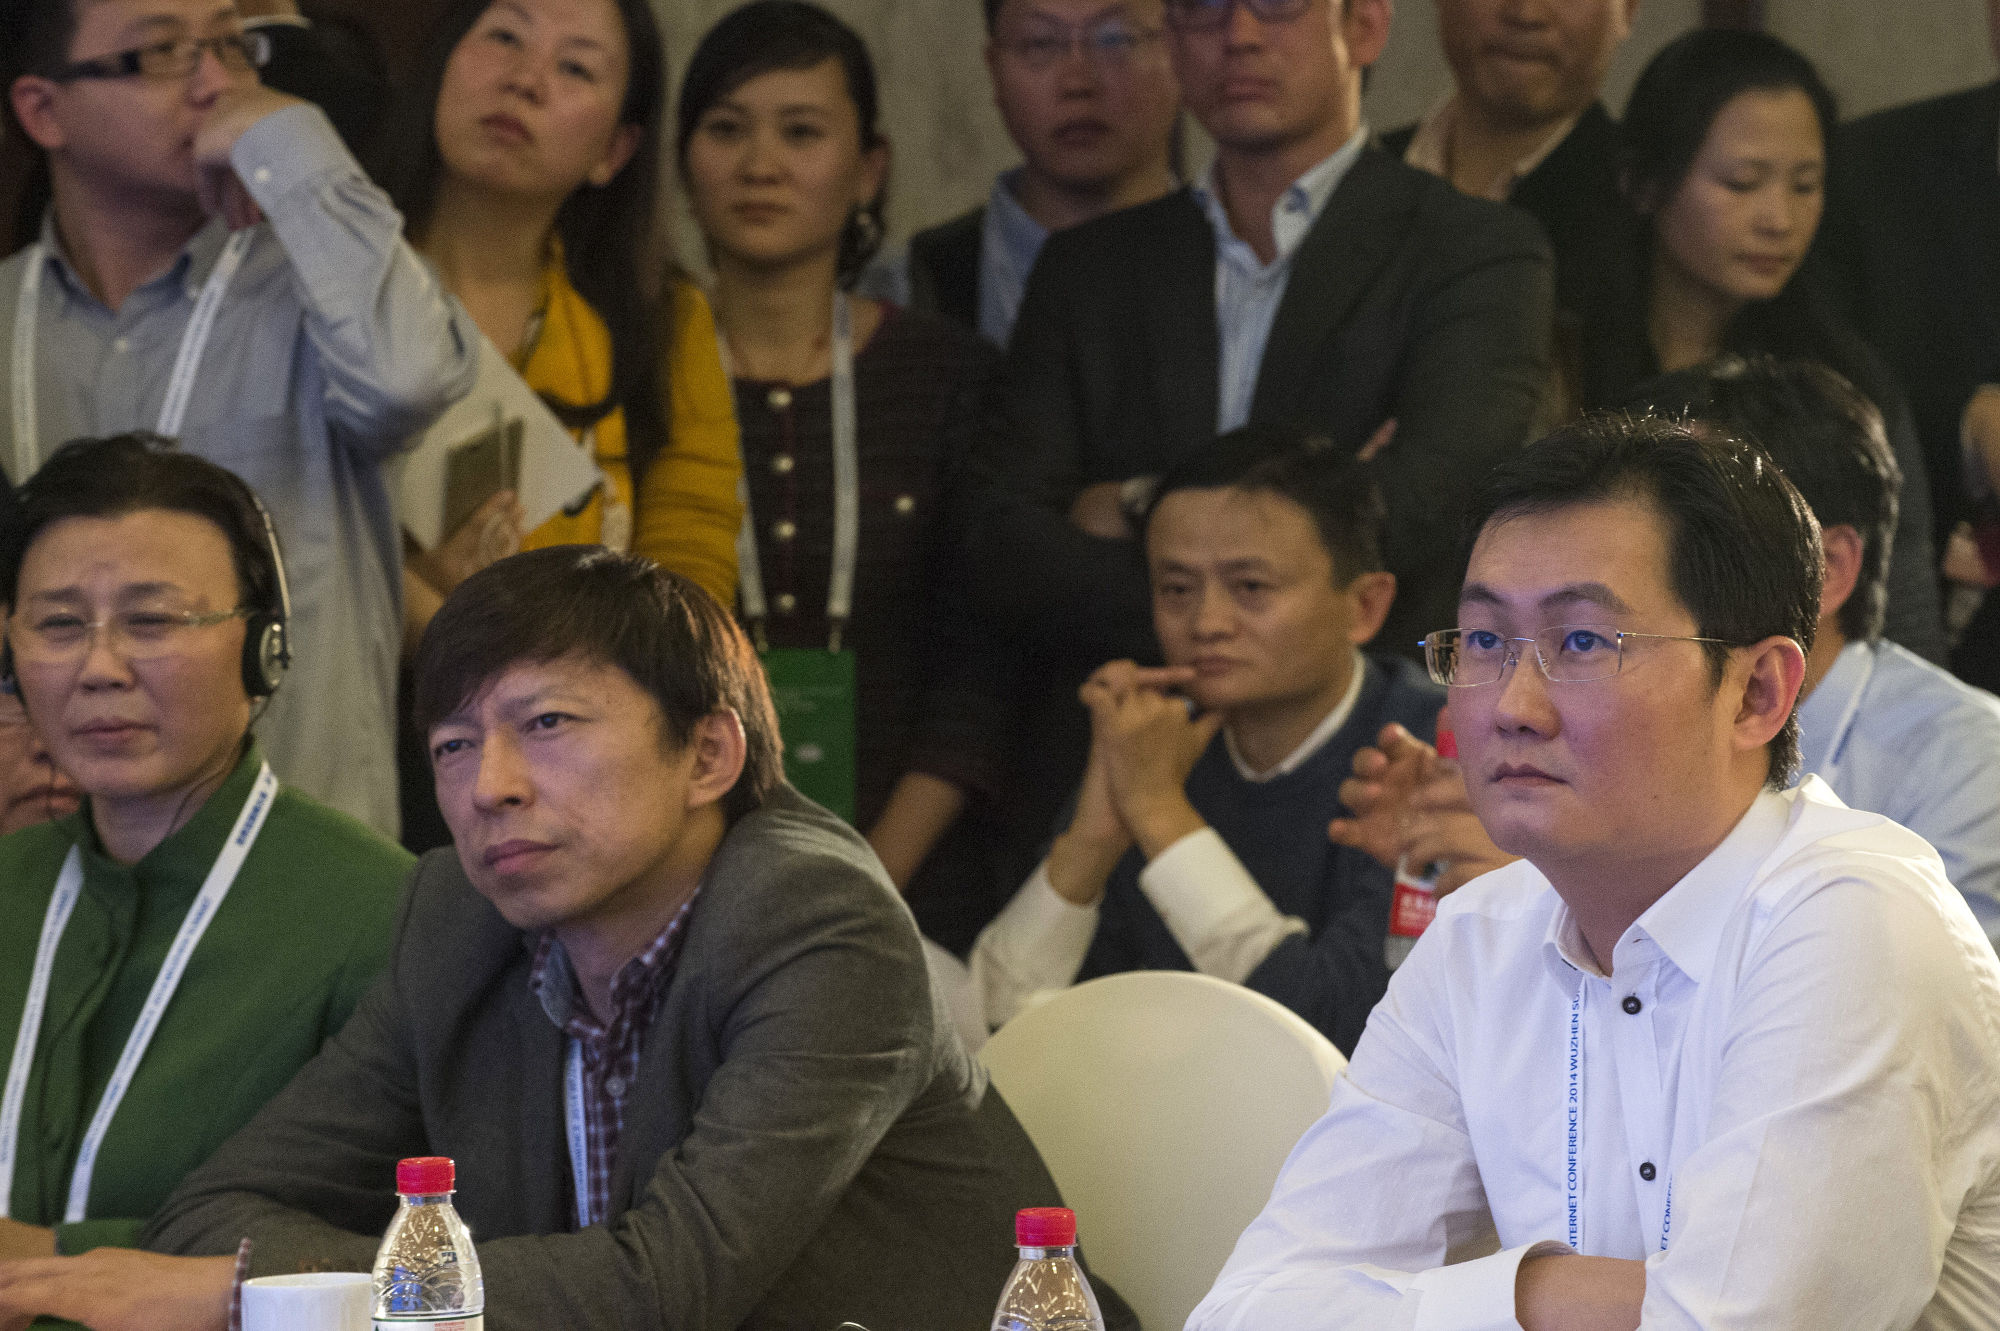 Ma Huateng (right), chairman of Tencent, Jack Ma (2nd right), executive chairman of Alibaba, and Charles Zhang, chairman of Sohu Inc., attend the World Internet Conference in Wuzhen. Photo: Xinhua